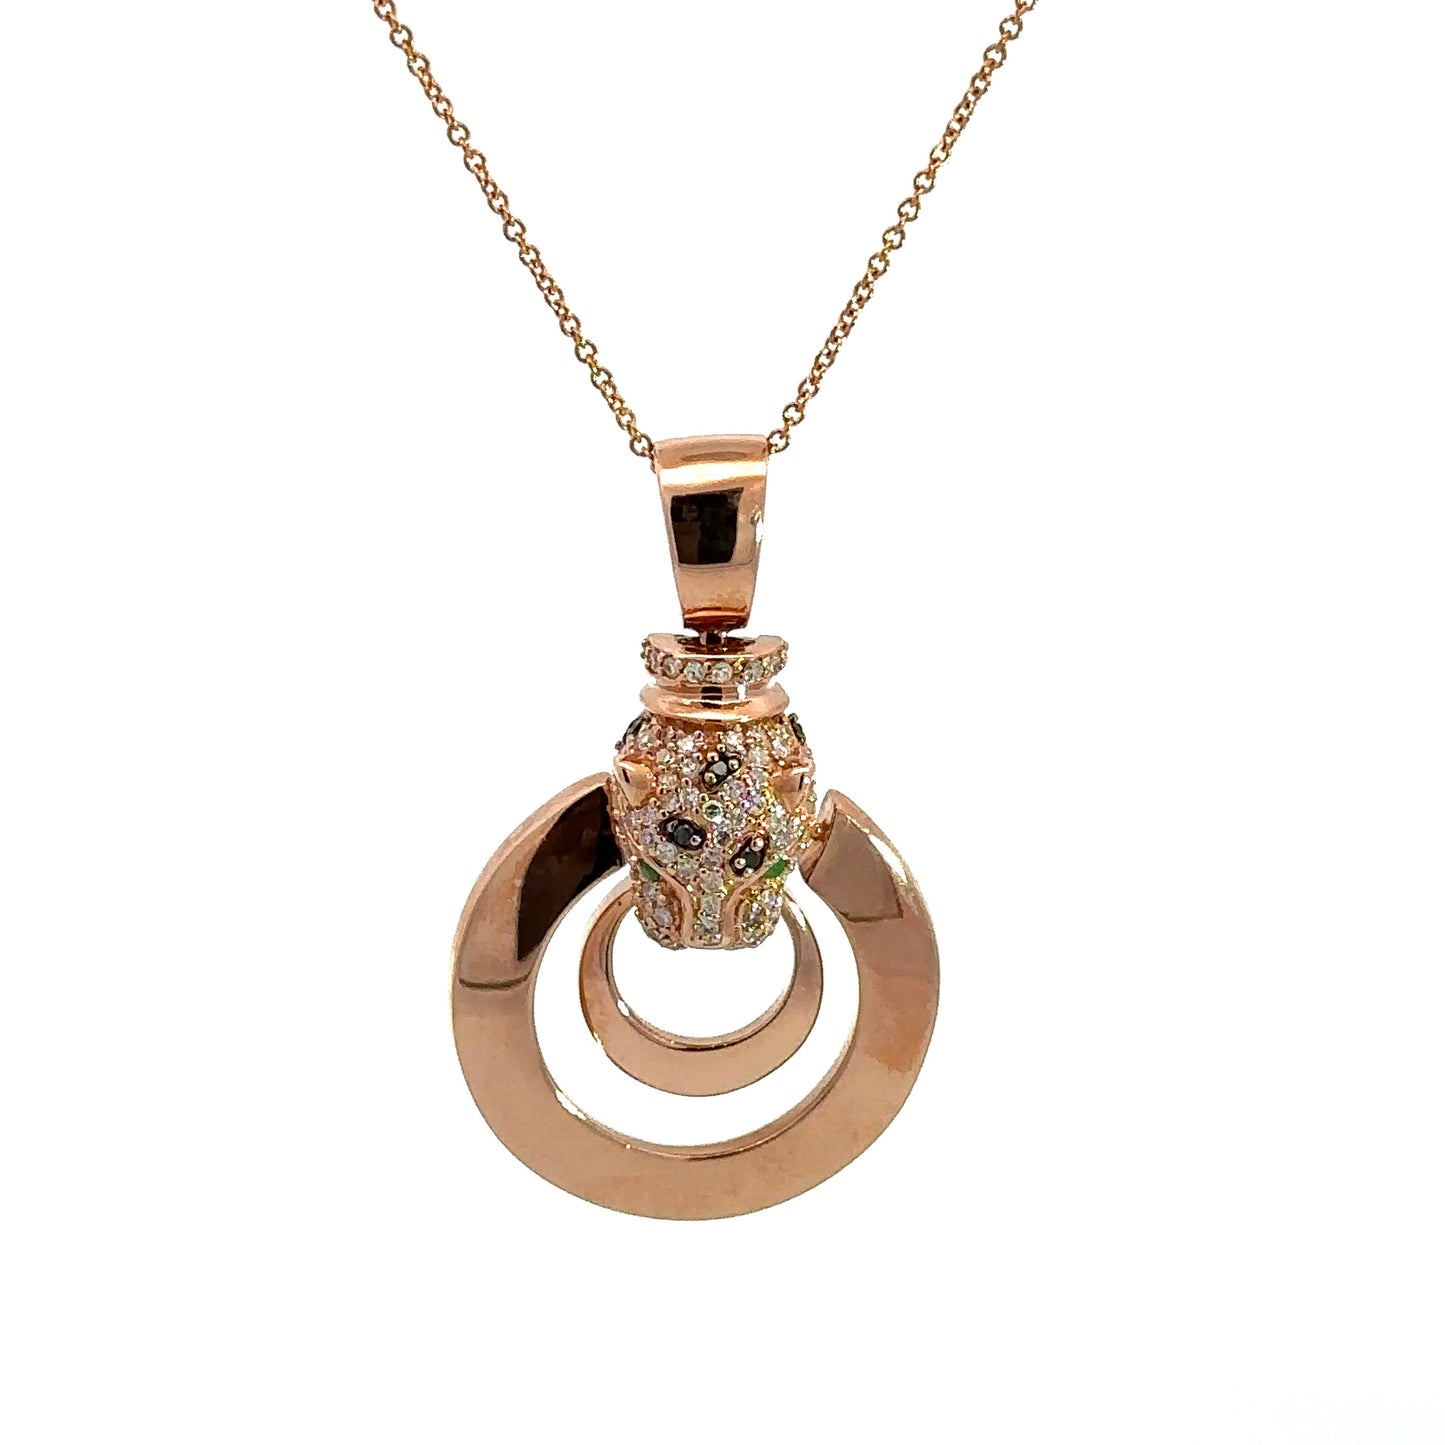 Hanging rose gold necklace with diamond panther head